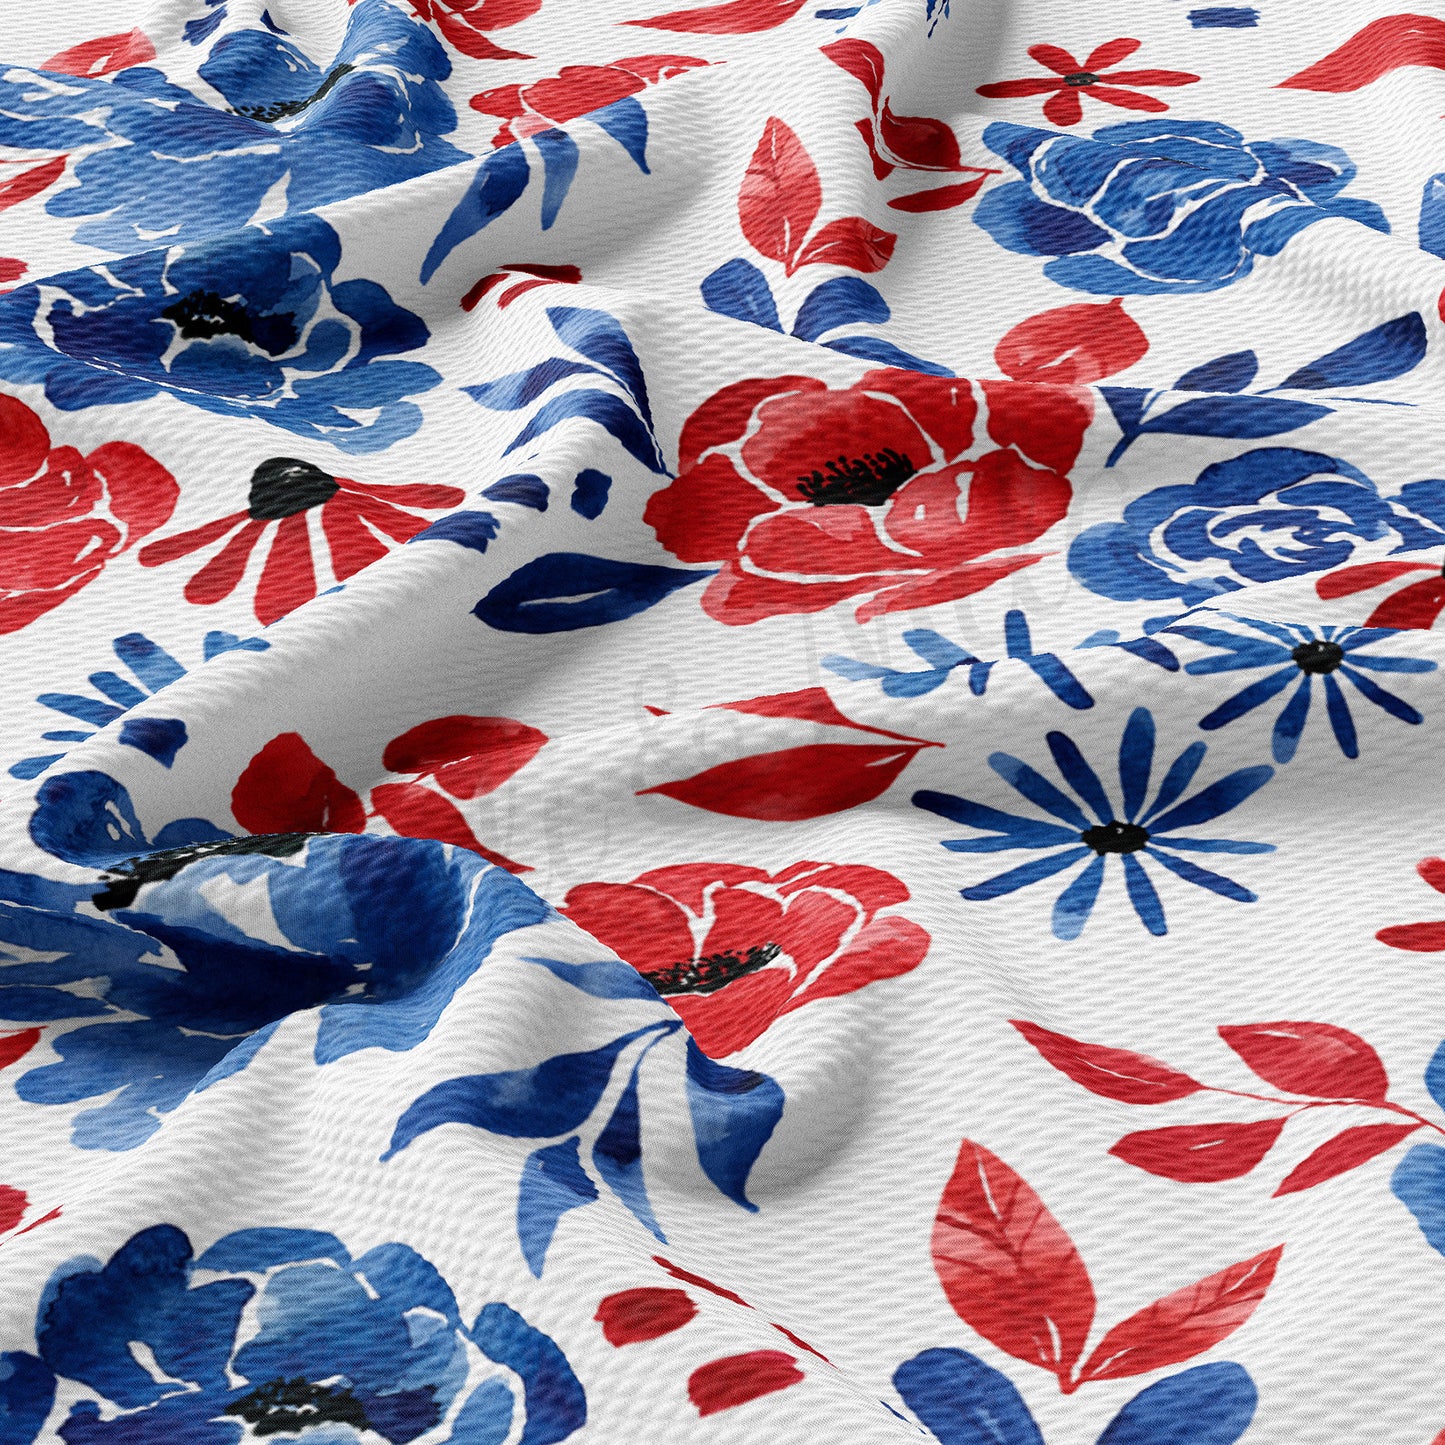 Patriotic 4th of July  Bullet Textured Fabric by the yard AA1609